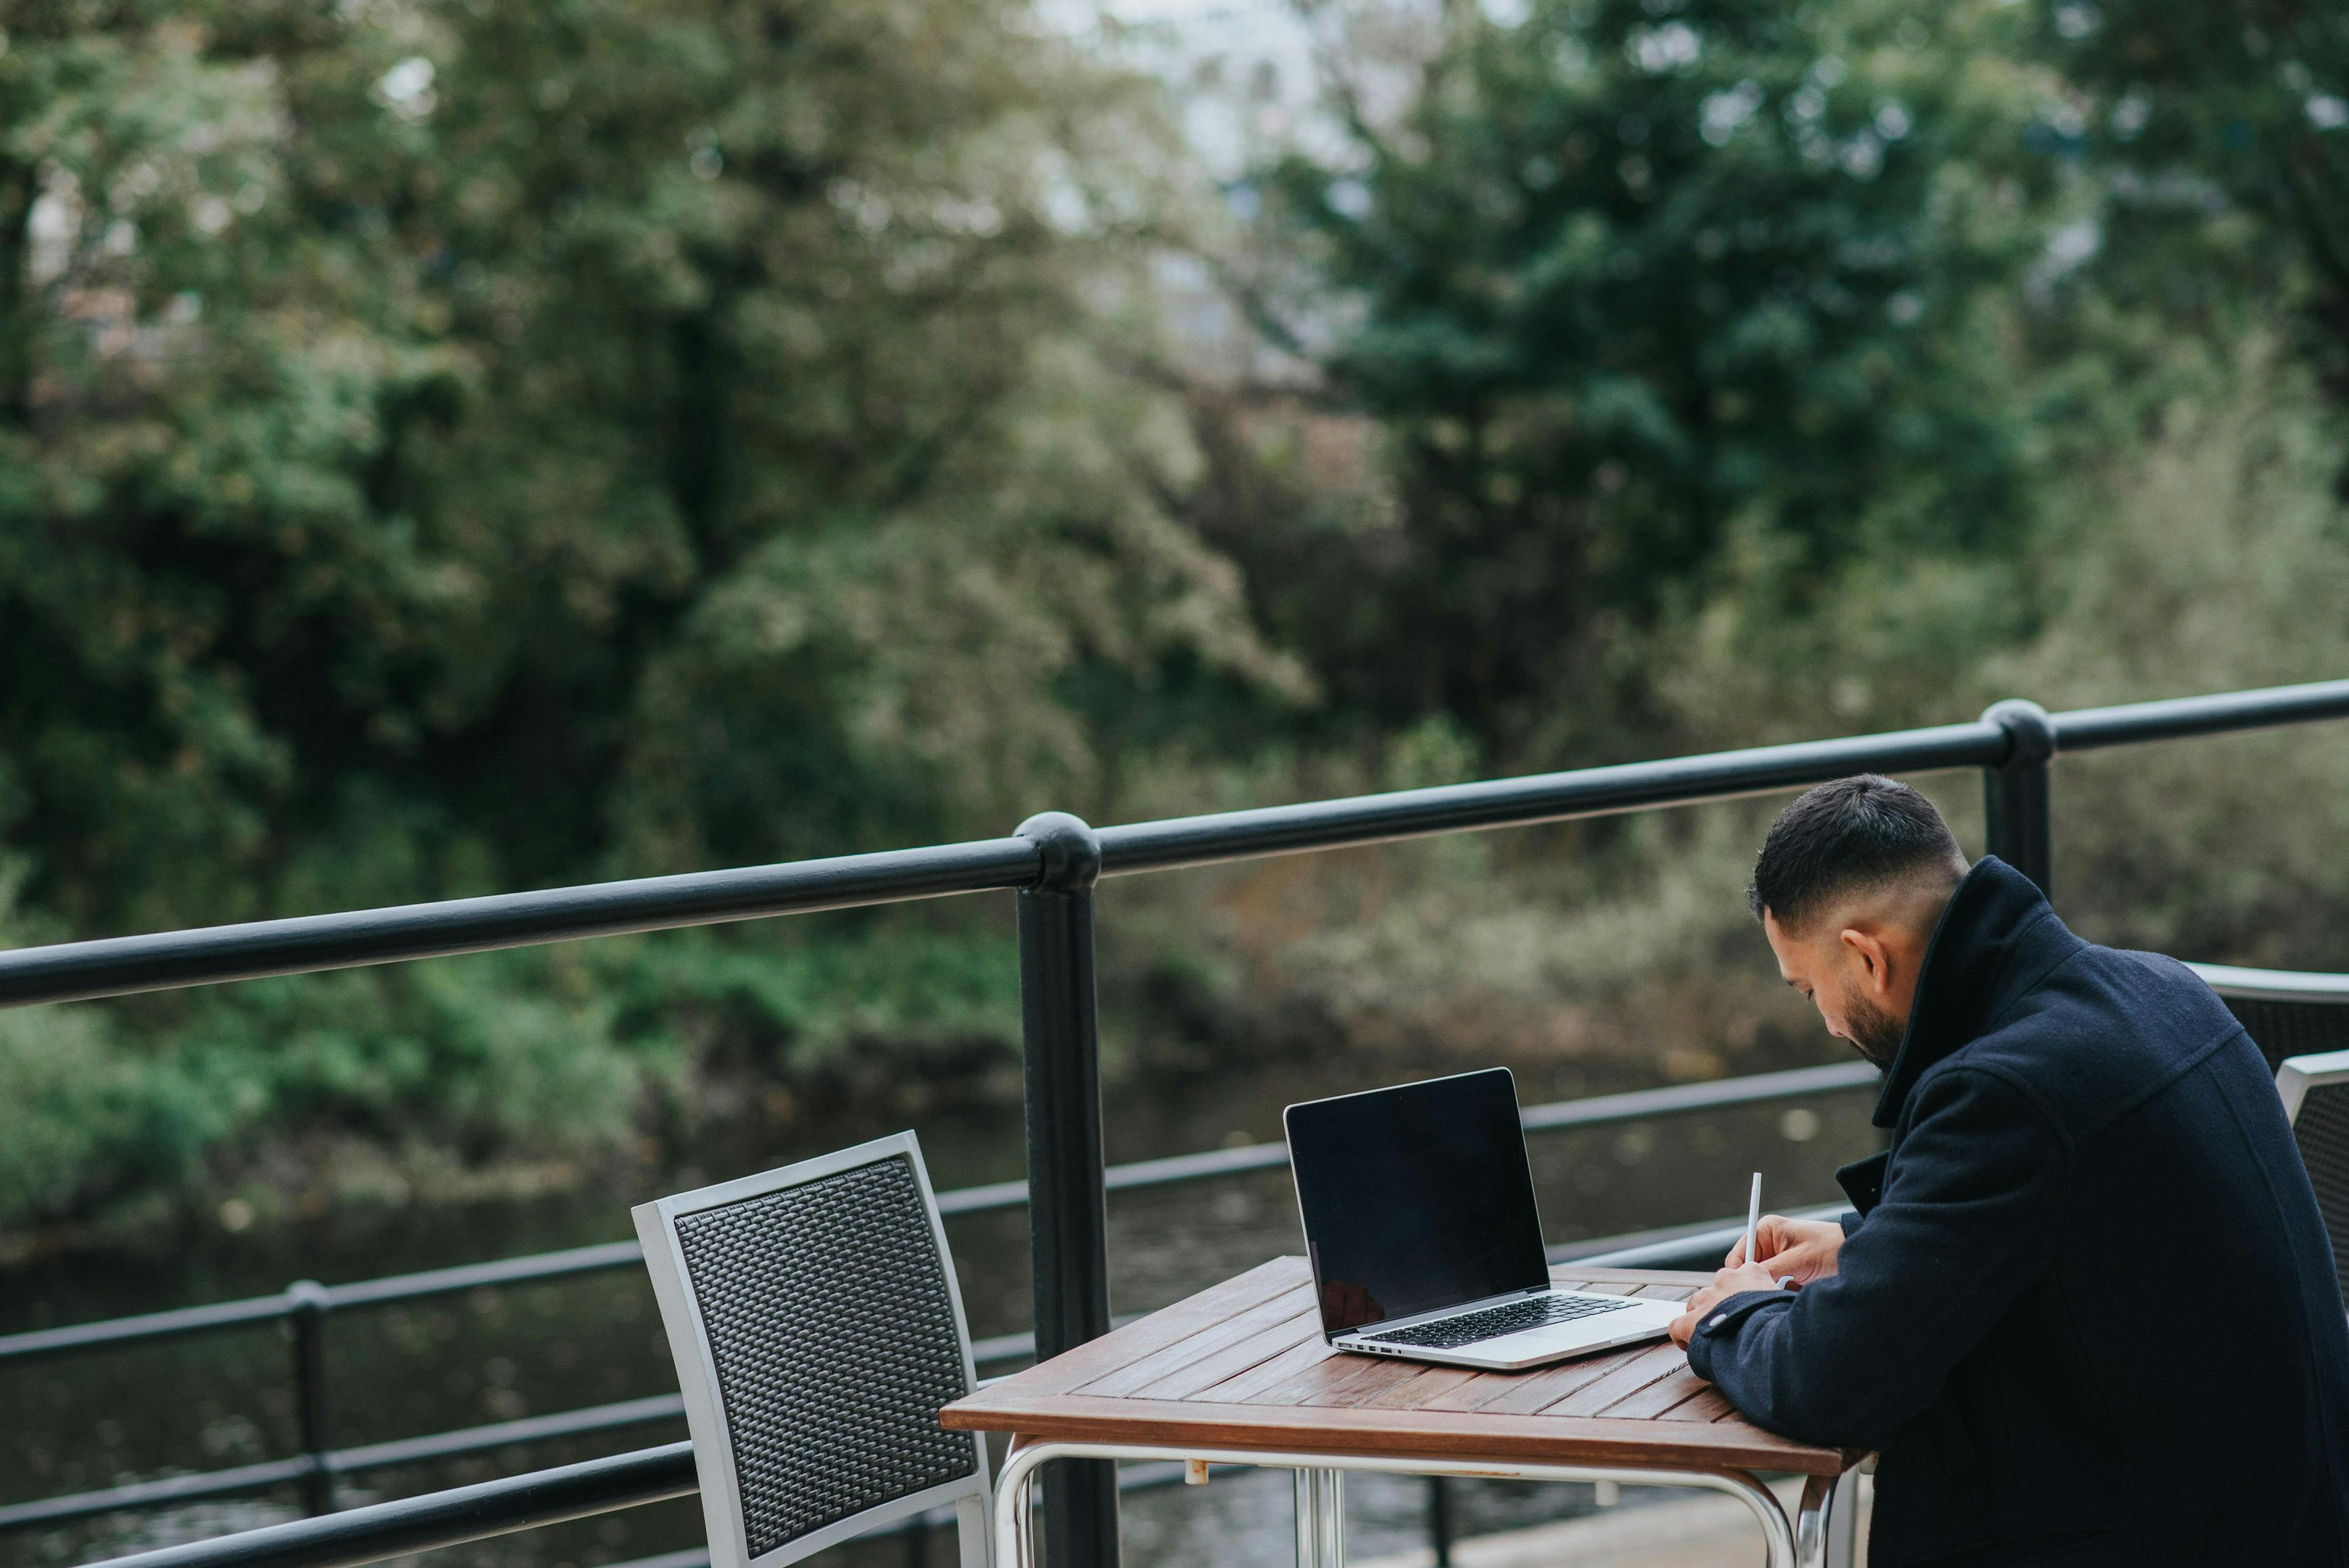 A man in a dark coat sits at an outdoor table near a river, working on his laptop and writing in a notebook. The setting is peaceful, with trees in the background. This image represents "high point marketing authority."